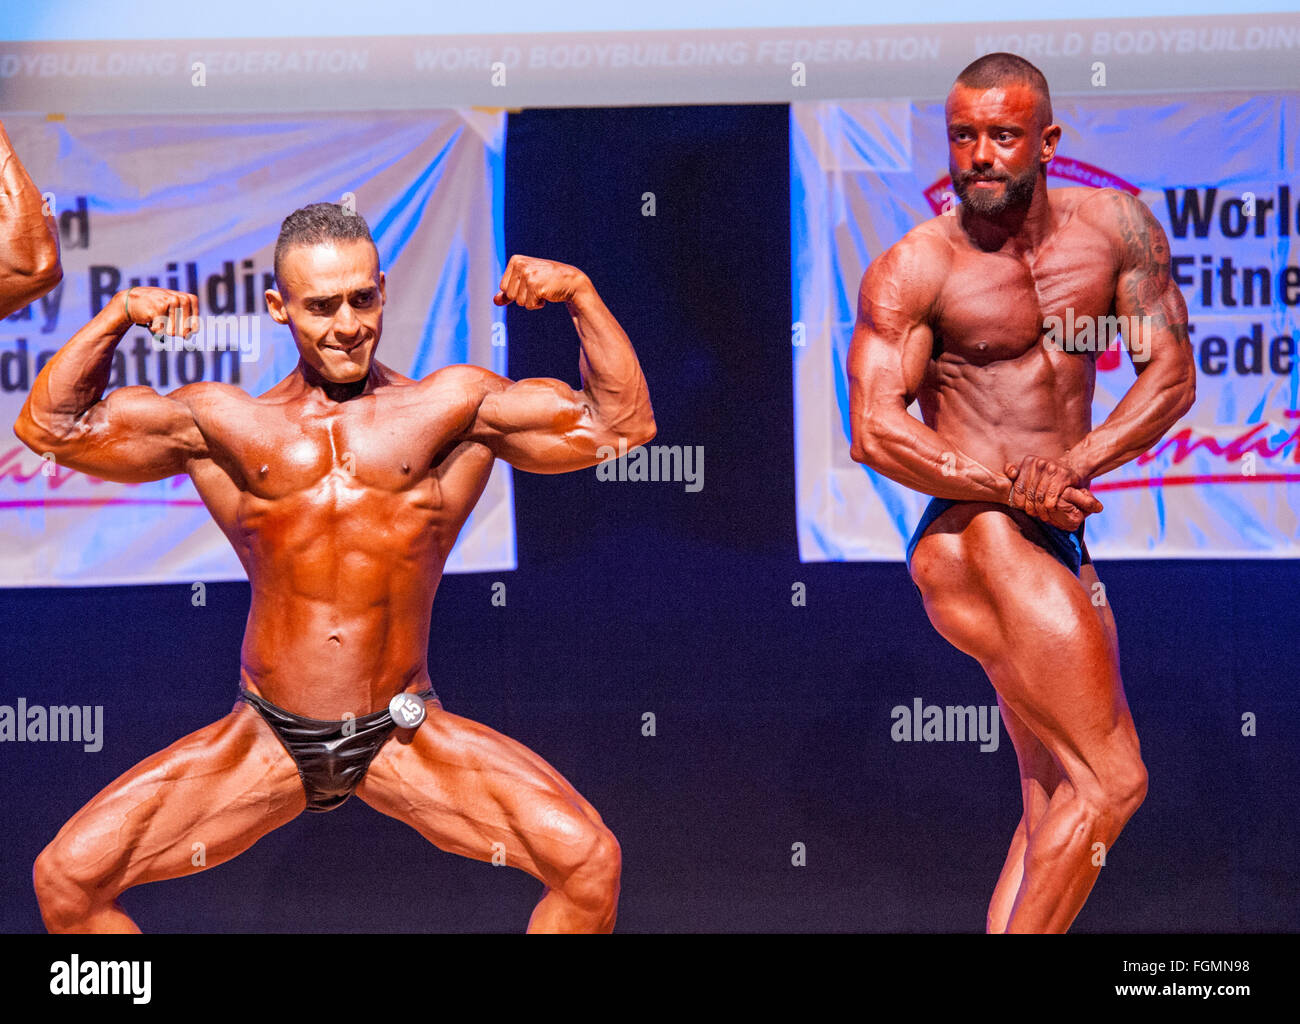 MAASTRICHT, THE NETHERLANDS - OCTOBER 25, 2015: Male bodybuilders Dennis Theys and other competitor flex their muscles Stock Photo